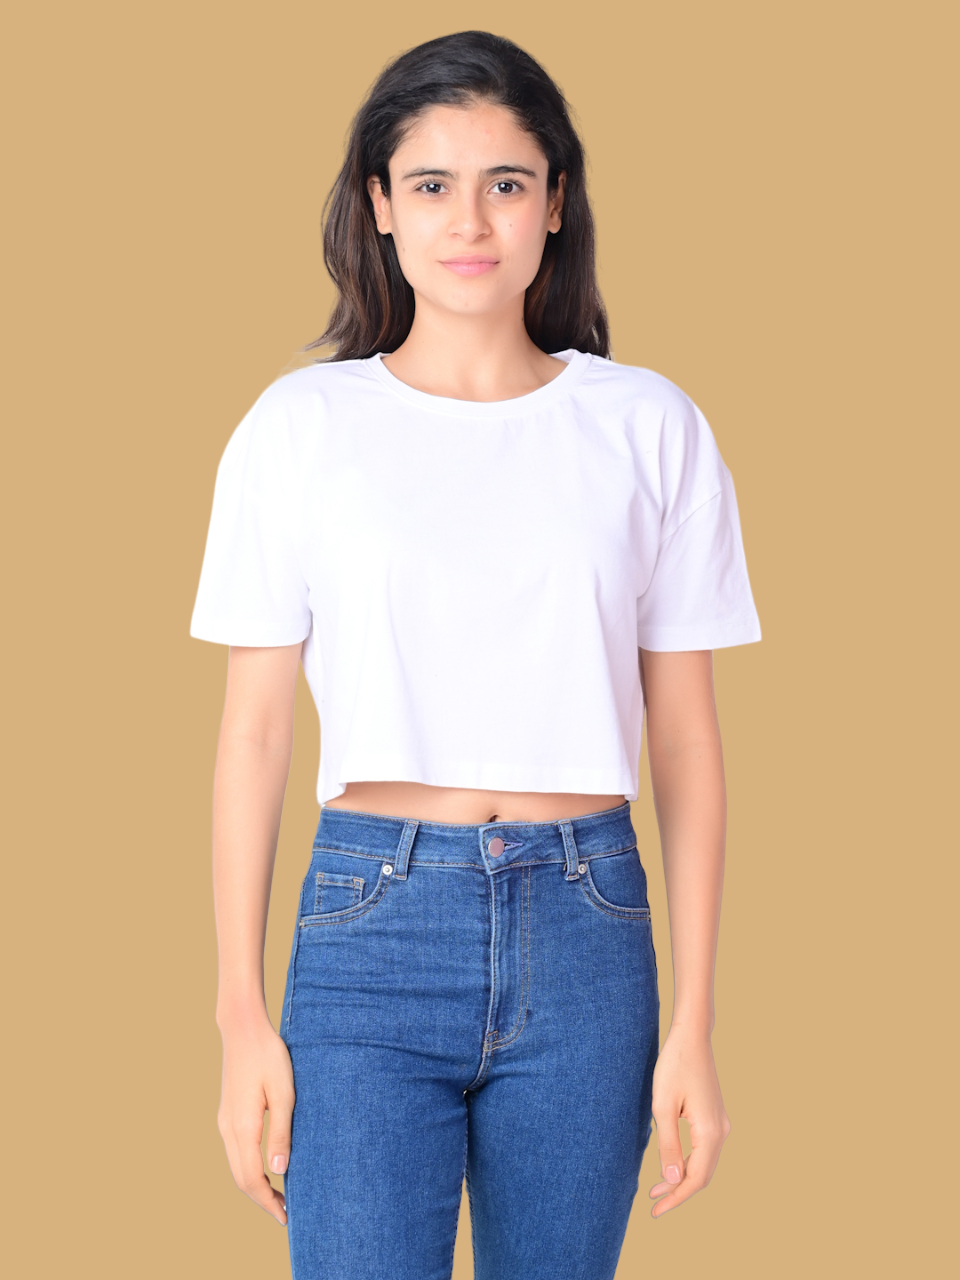 Flawless Women Wing White Crop Top Being Flawless